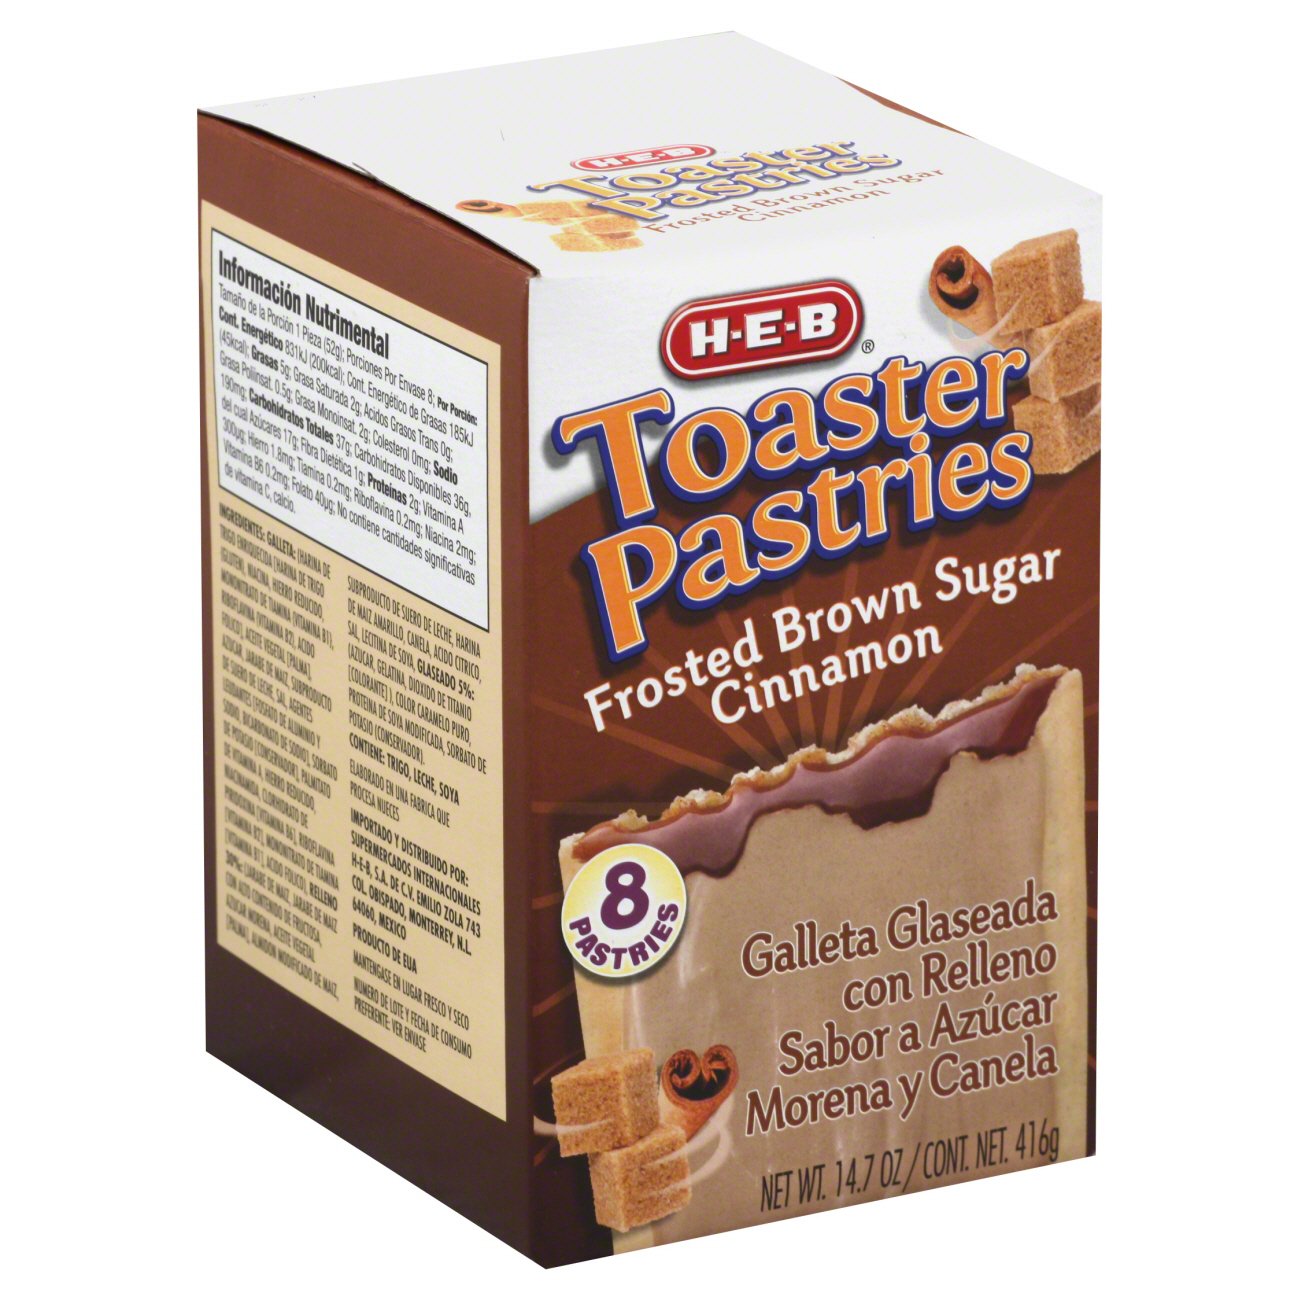 Pop-Tarts Frosted Strawberry & Brown Sugar Cinnamon Toaster Pastries - Shop  Toaster Pastries at H-E-B